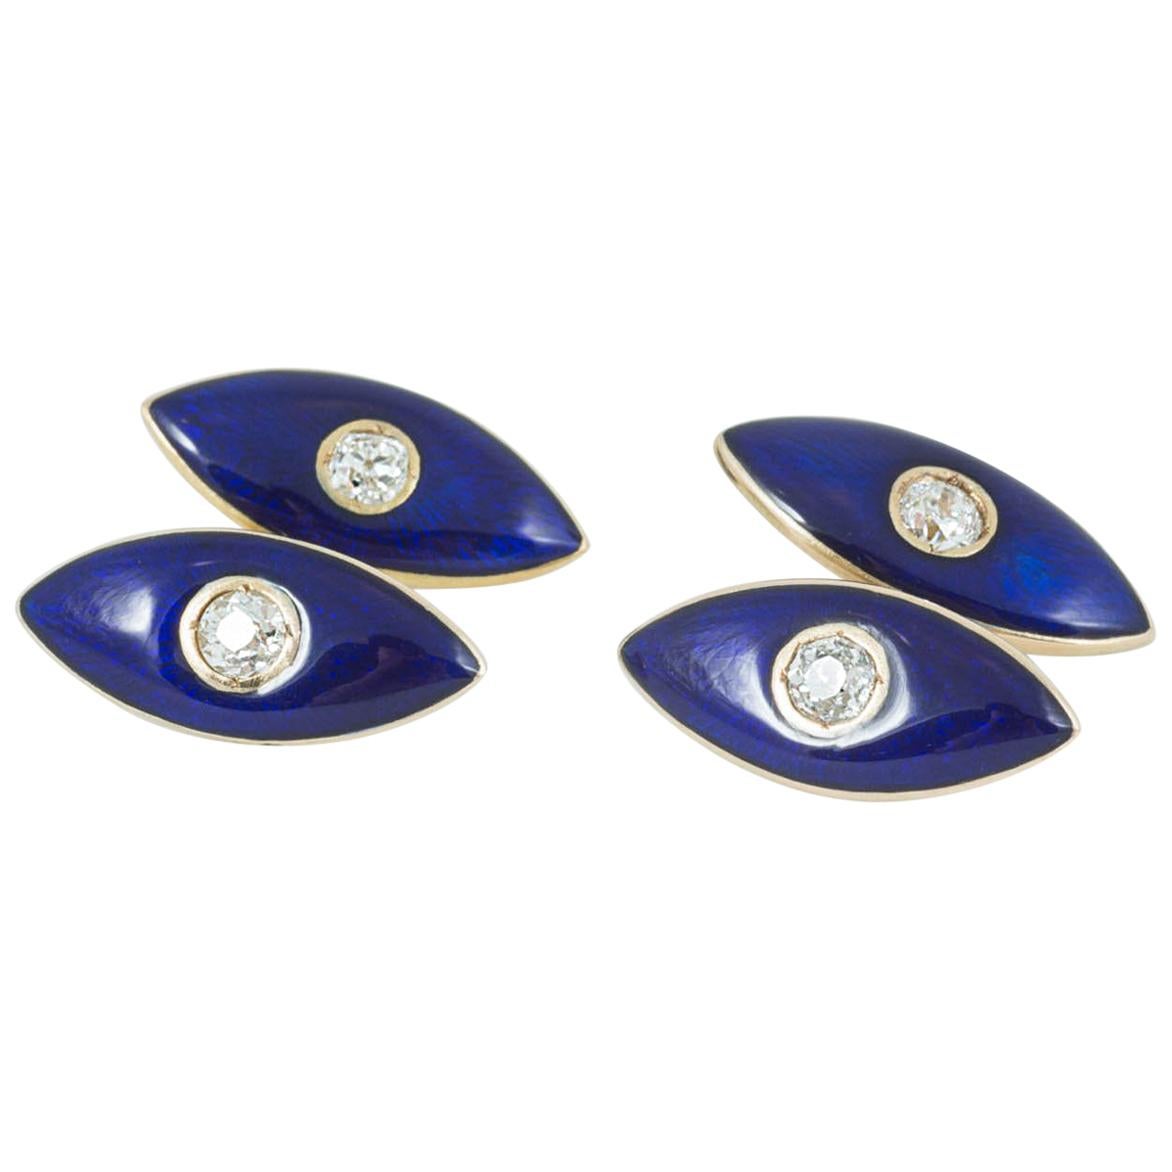 Cufflinks in 18 Carat Gold, Central Diamond and Blue Enamel, English circa 1890 For Sale